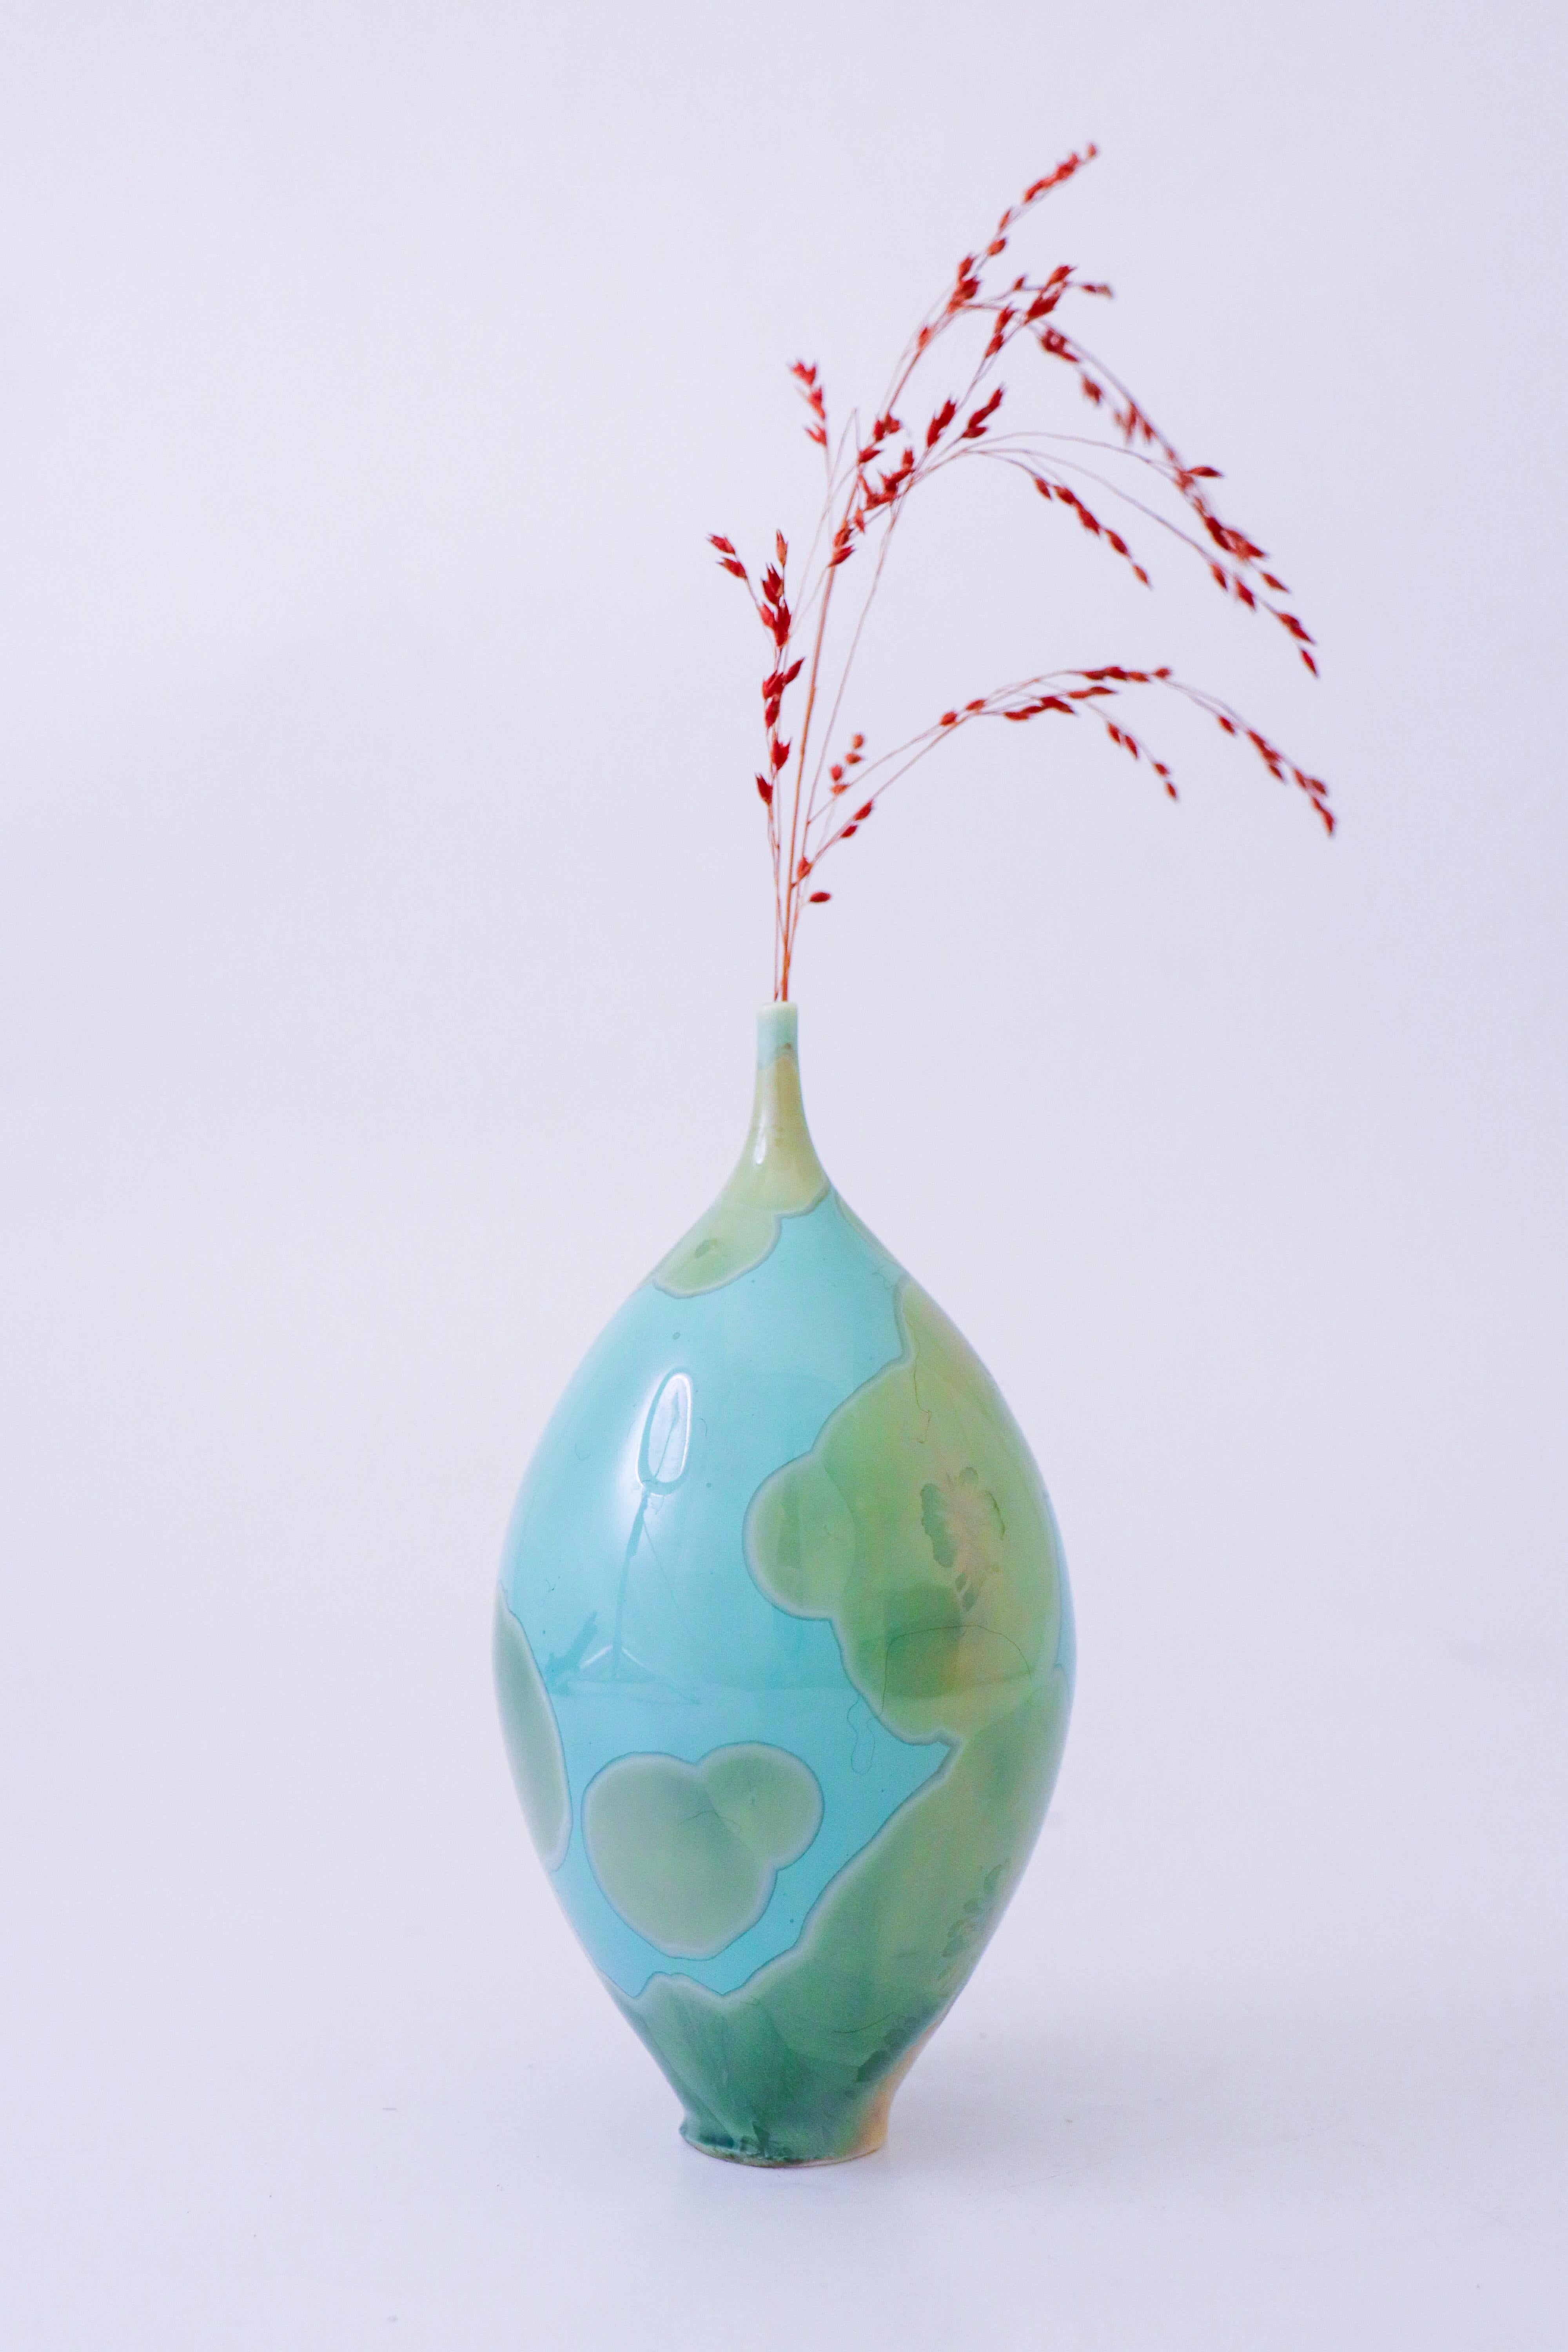 Isak Isaksson Turquoise Ceramic Vase Crystalline Glaze - Contemporary Artist In Excellent Condition For Sale In Stockholm, SE